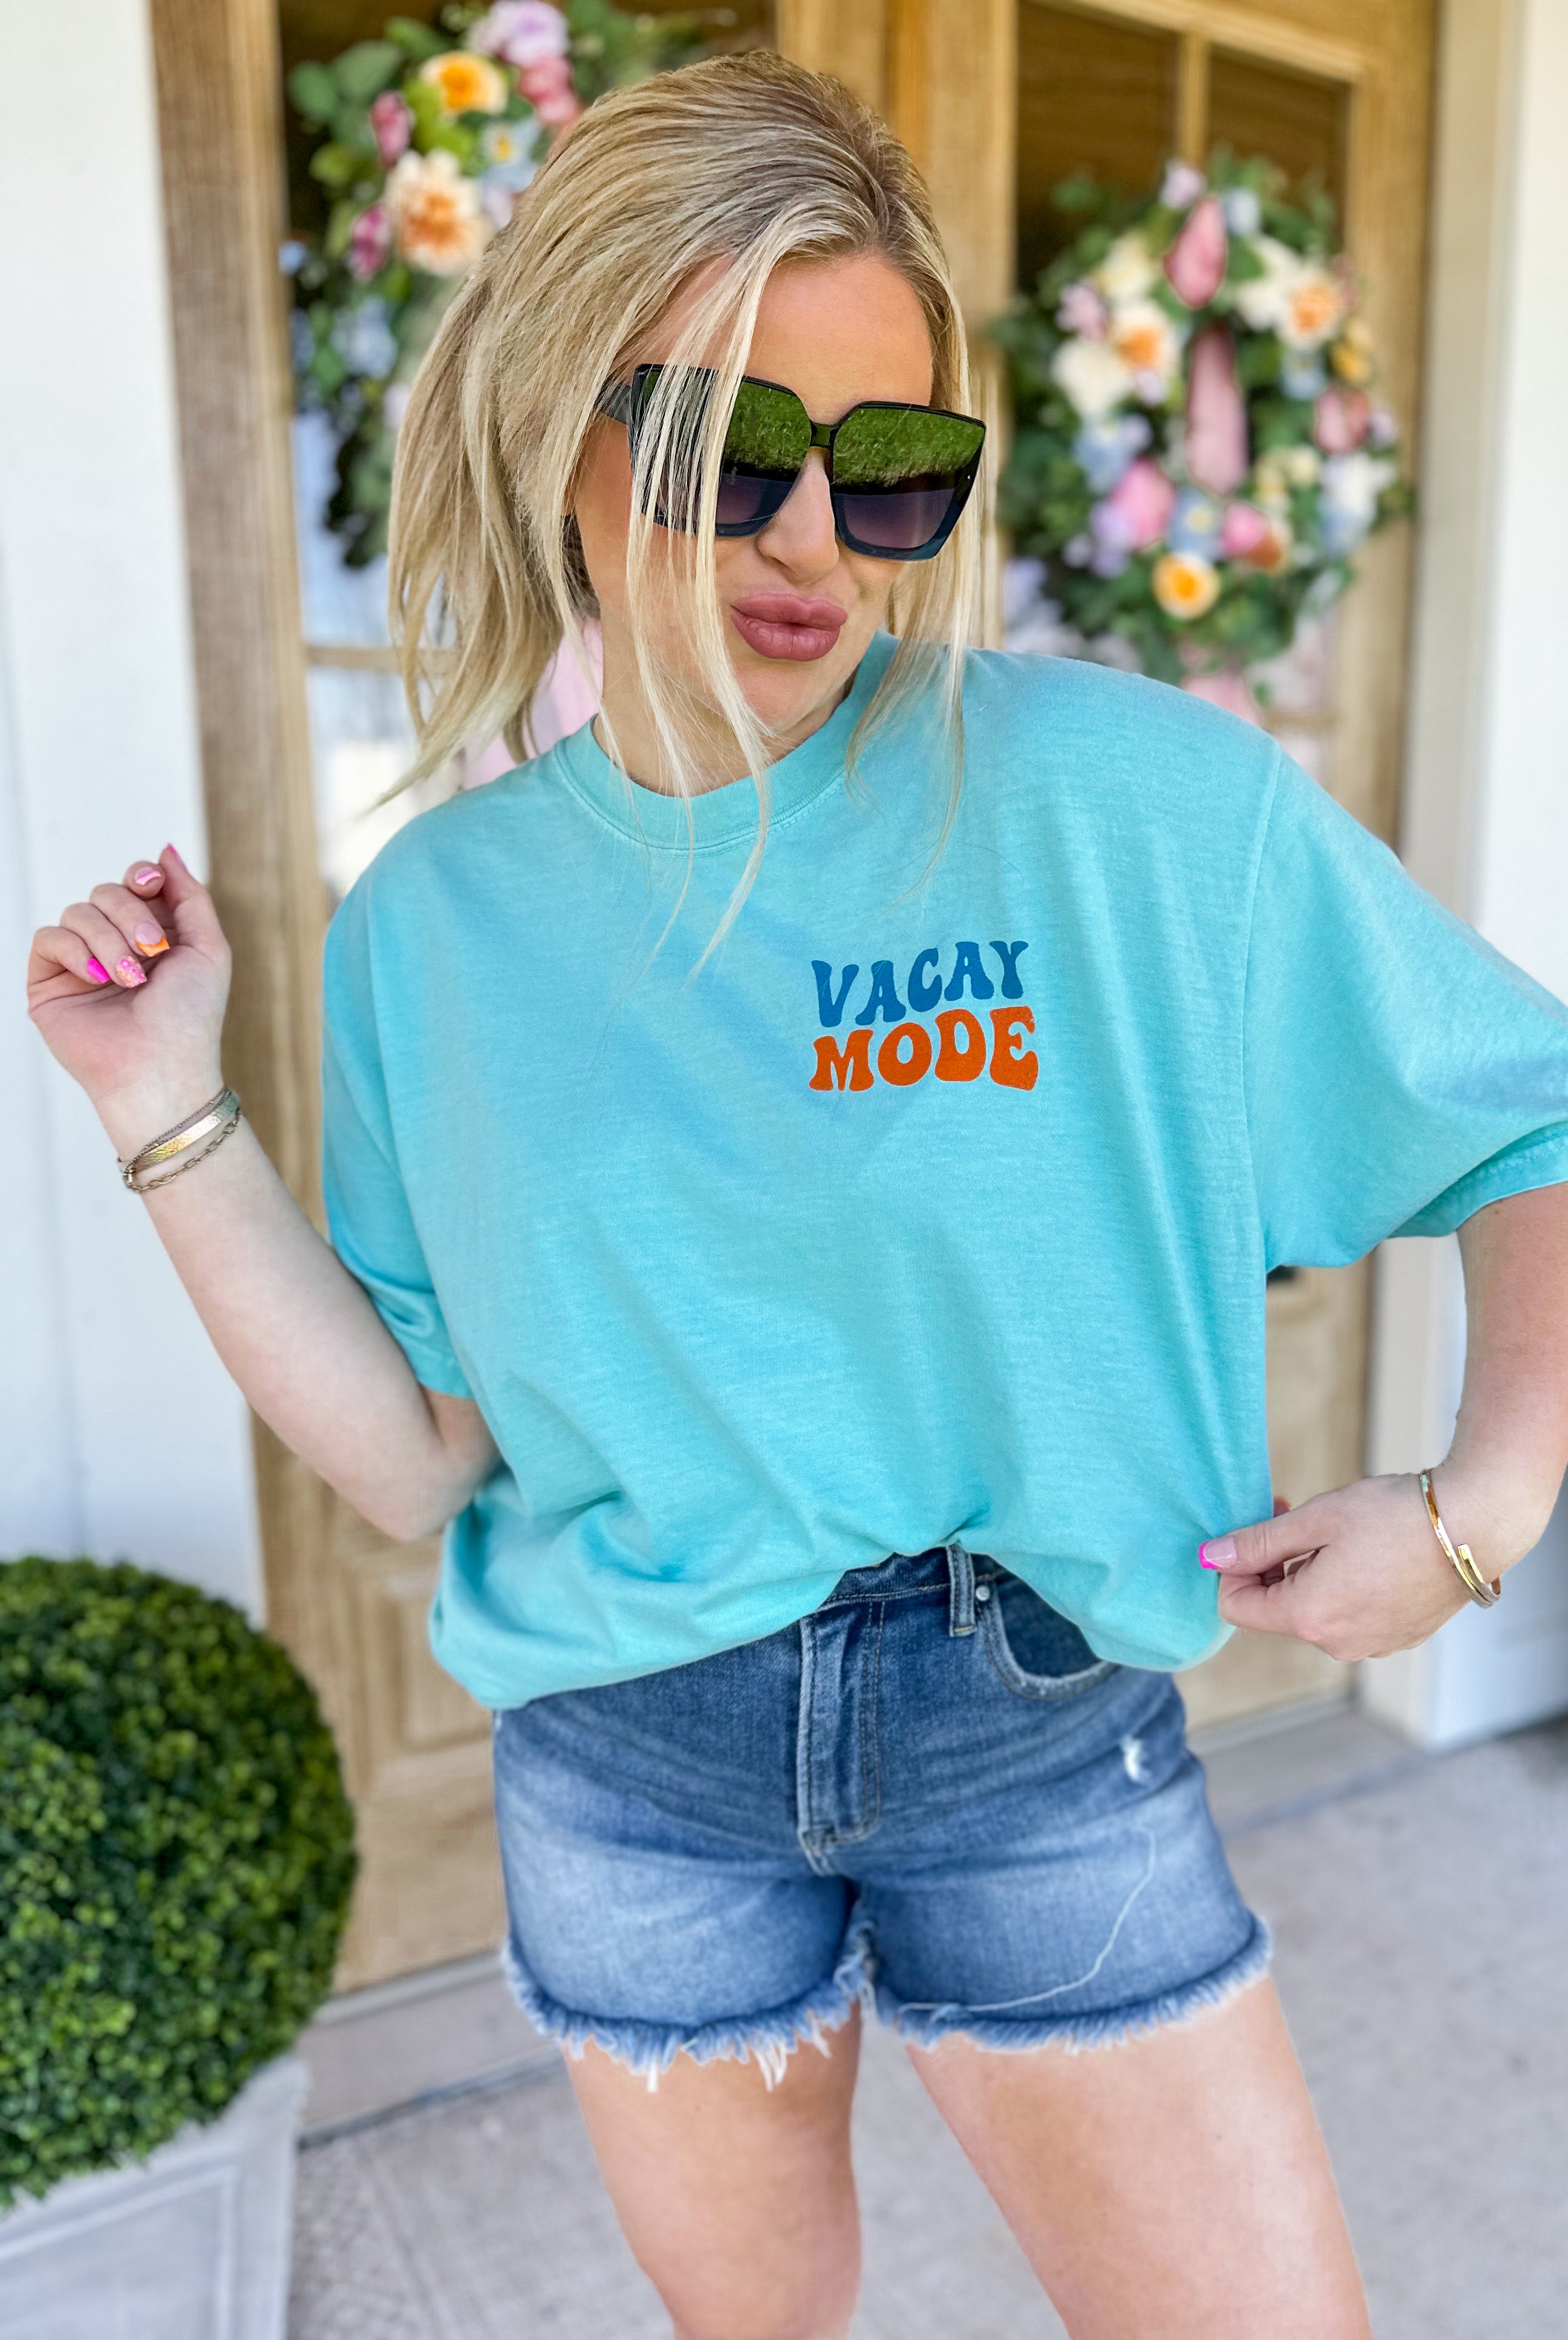 VACAY MODE Vintage Oversize Short Sleeve Graphic Tee - Be You Boutique